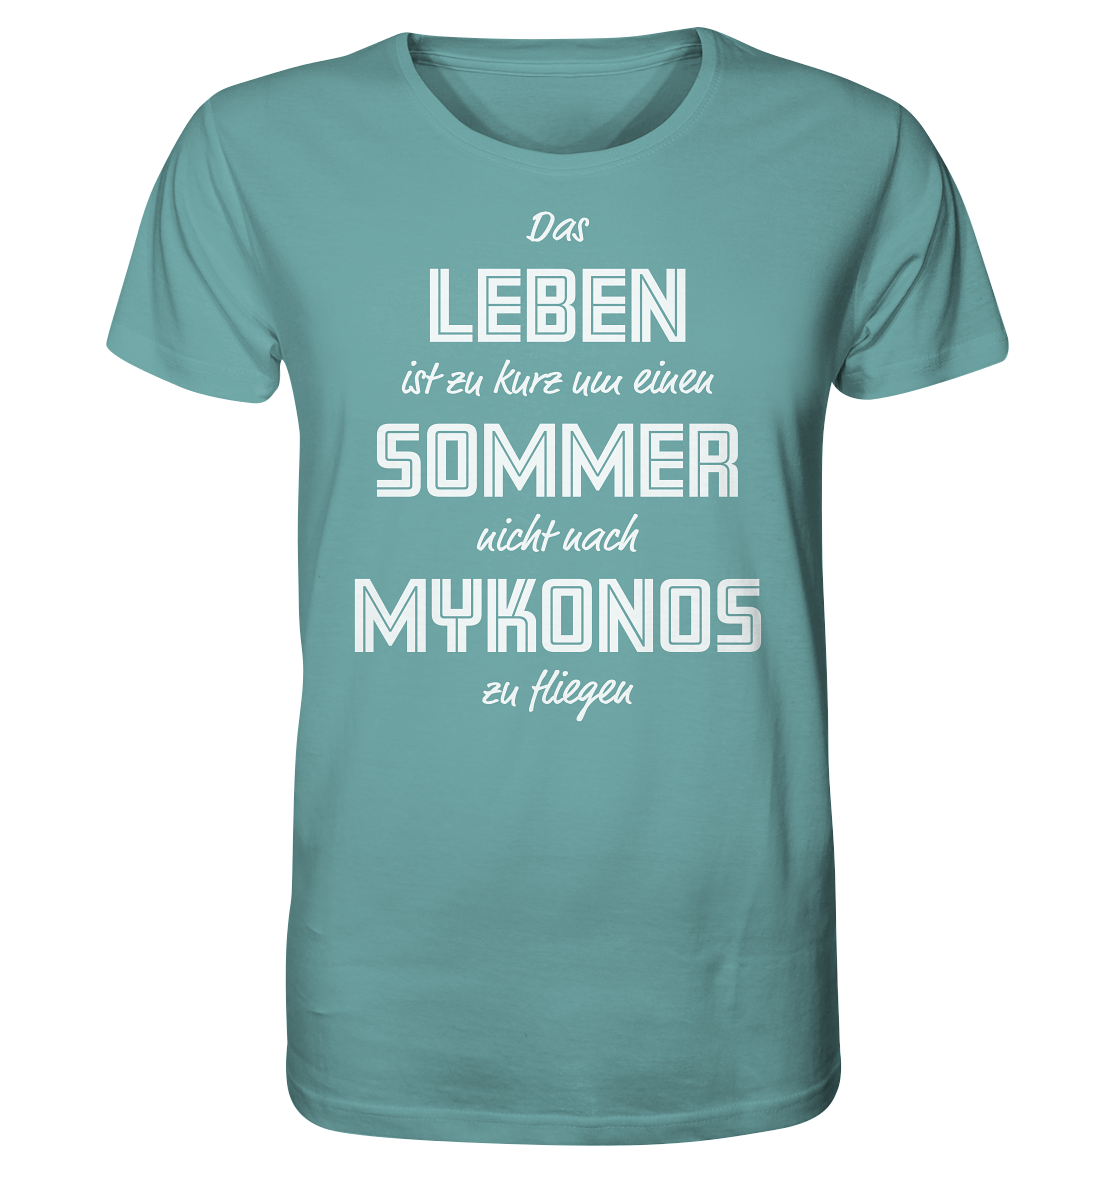 Life is too short not to fly to Mykonos for a summer - Organic Shirt